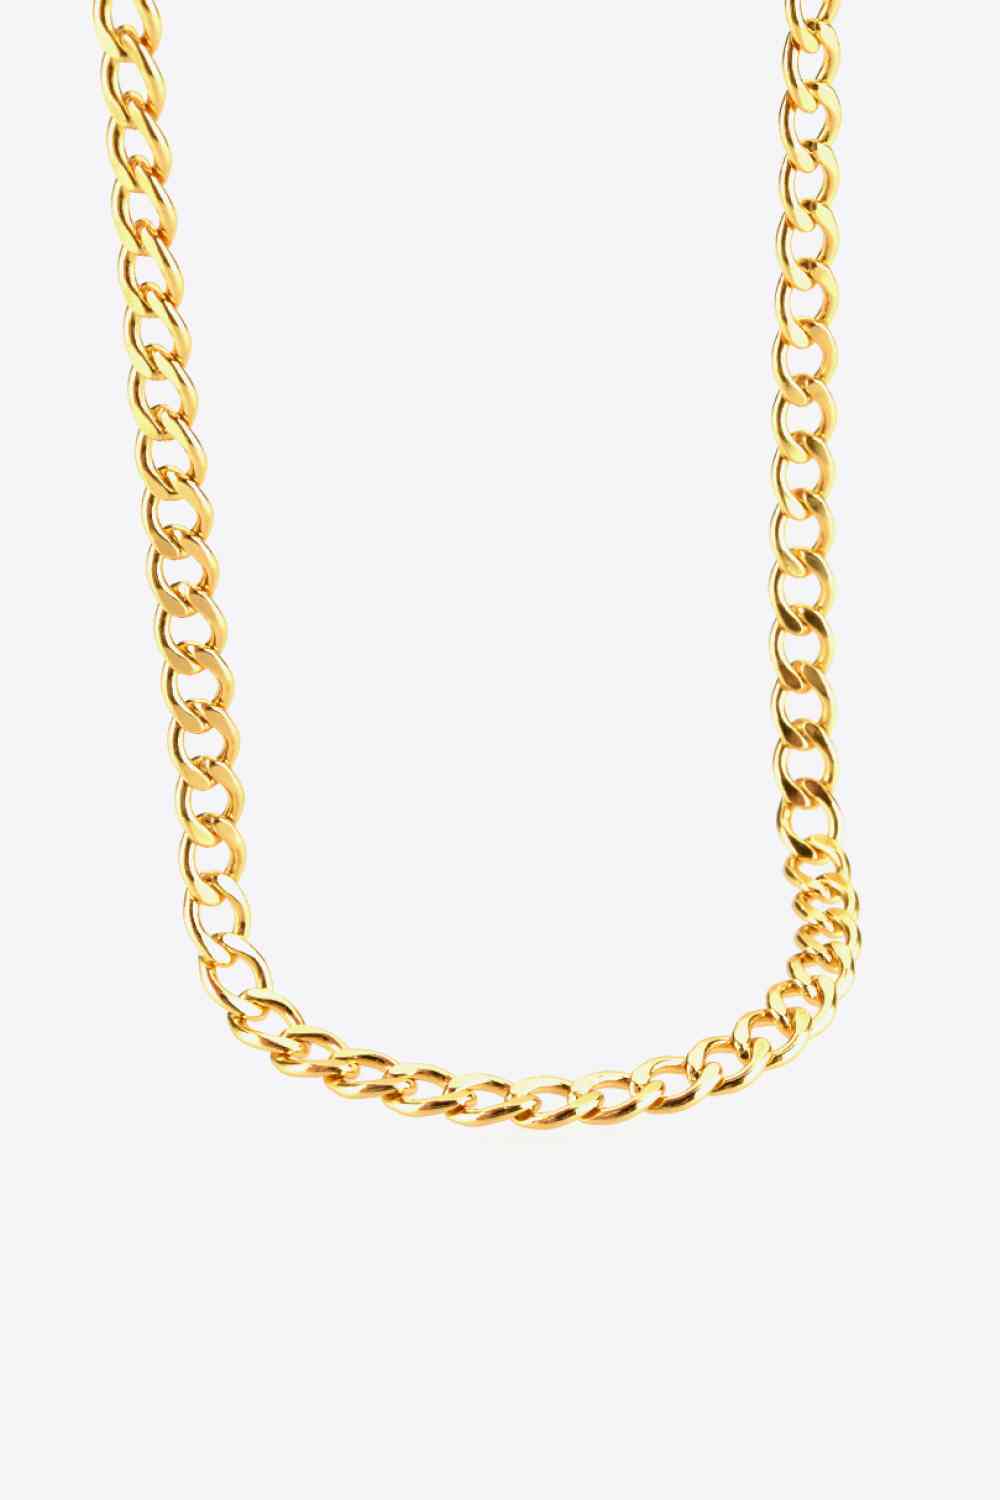 Sterling Silver Gold or Silver Curb Chain Necklace 14"